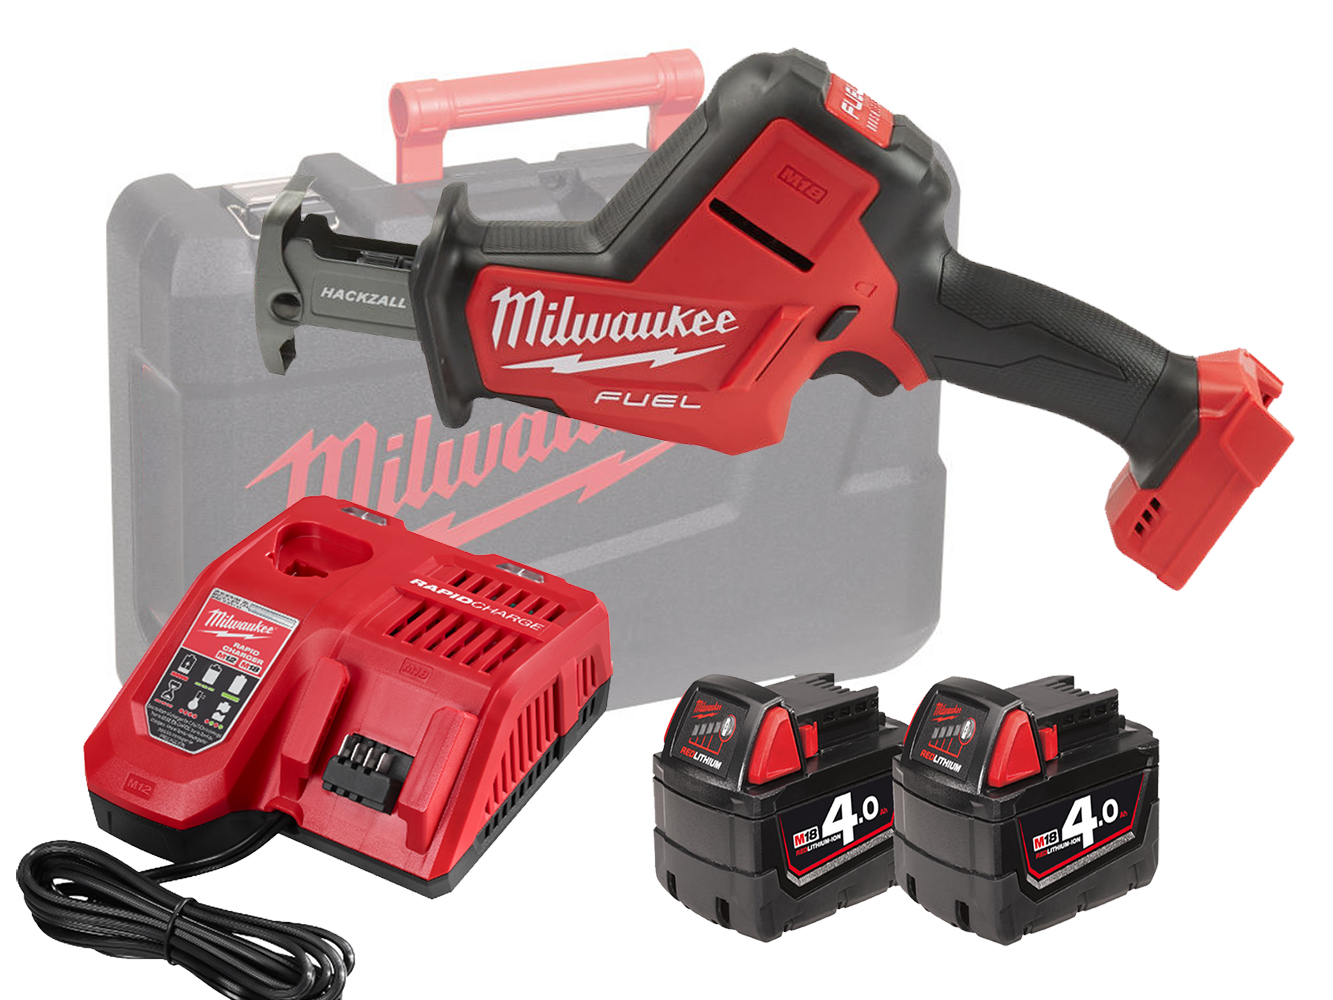 Milwaukee M18FHZ 18V Fuel Brushless Hackzall (Reciprocating Saw) - 4.0Ah Pack